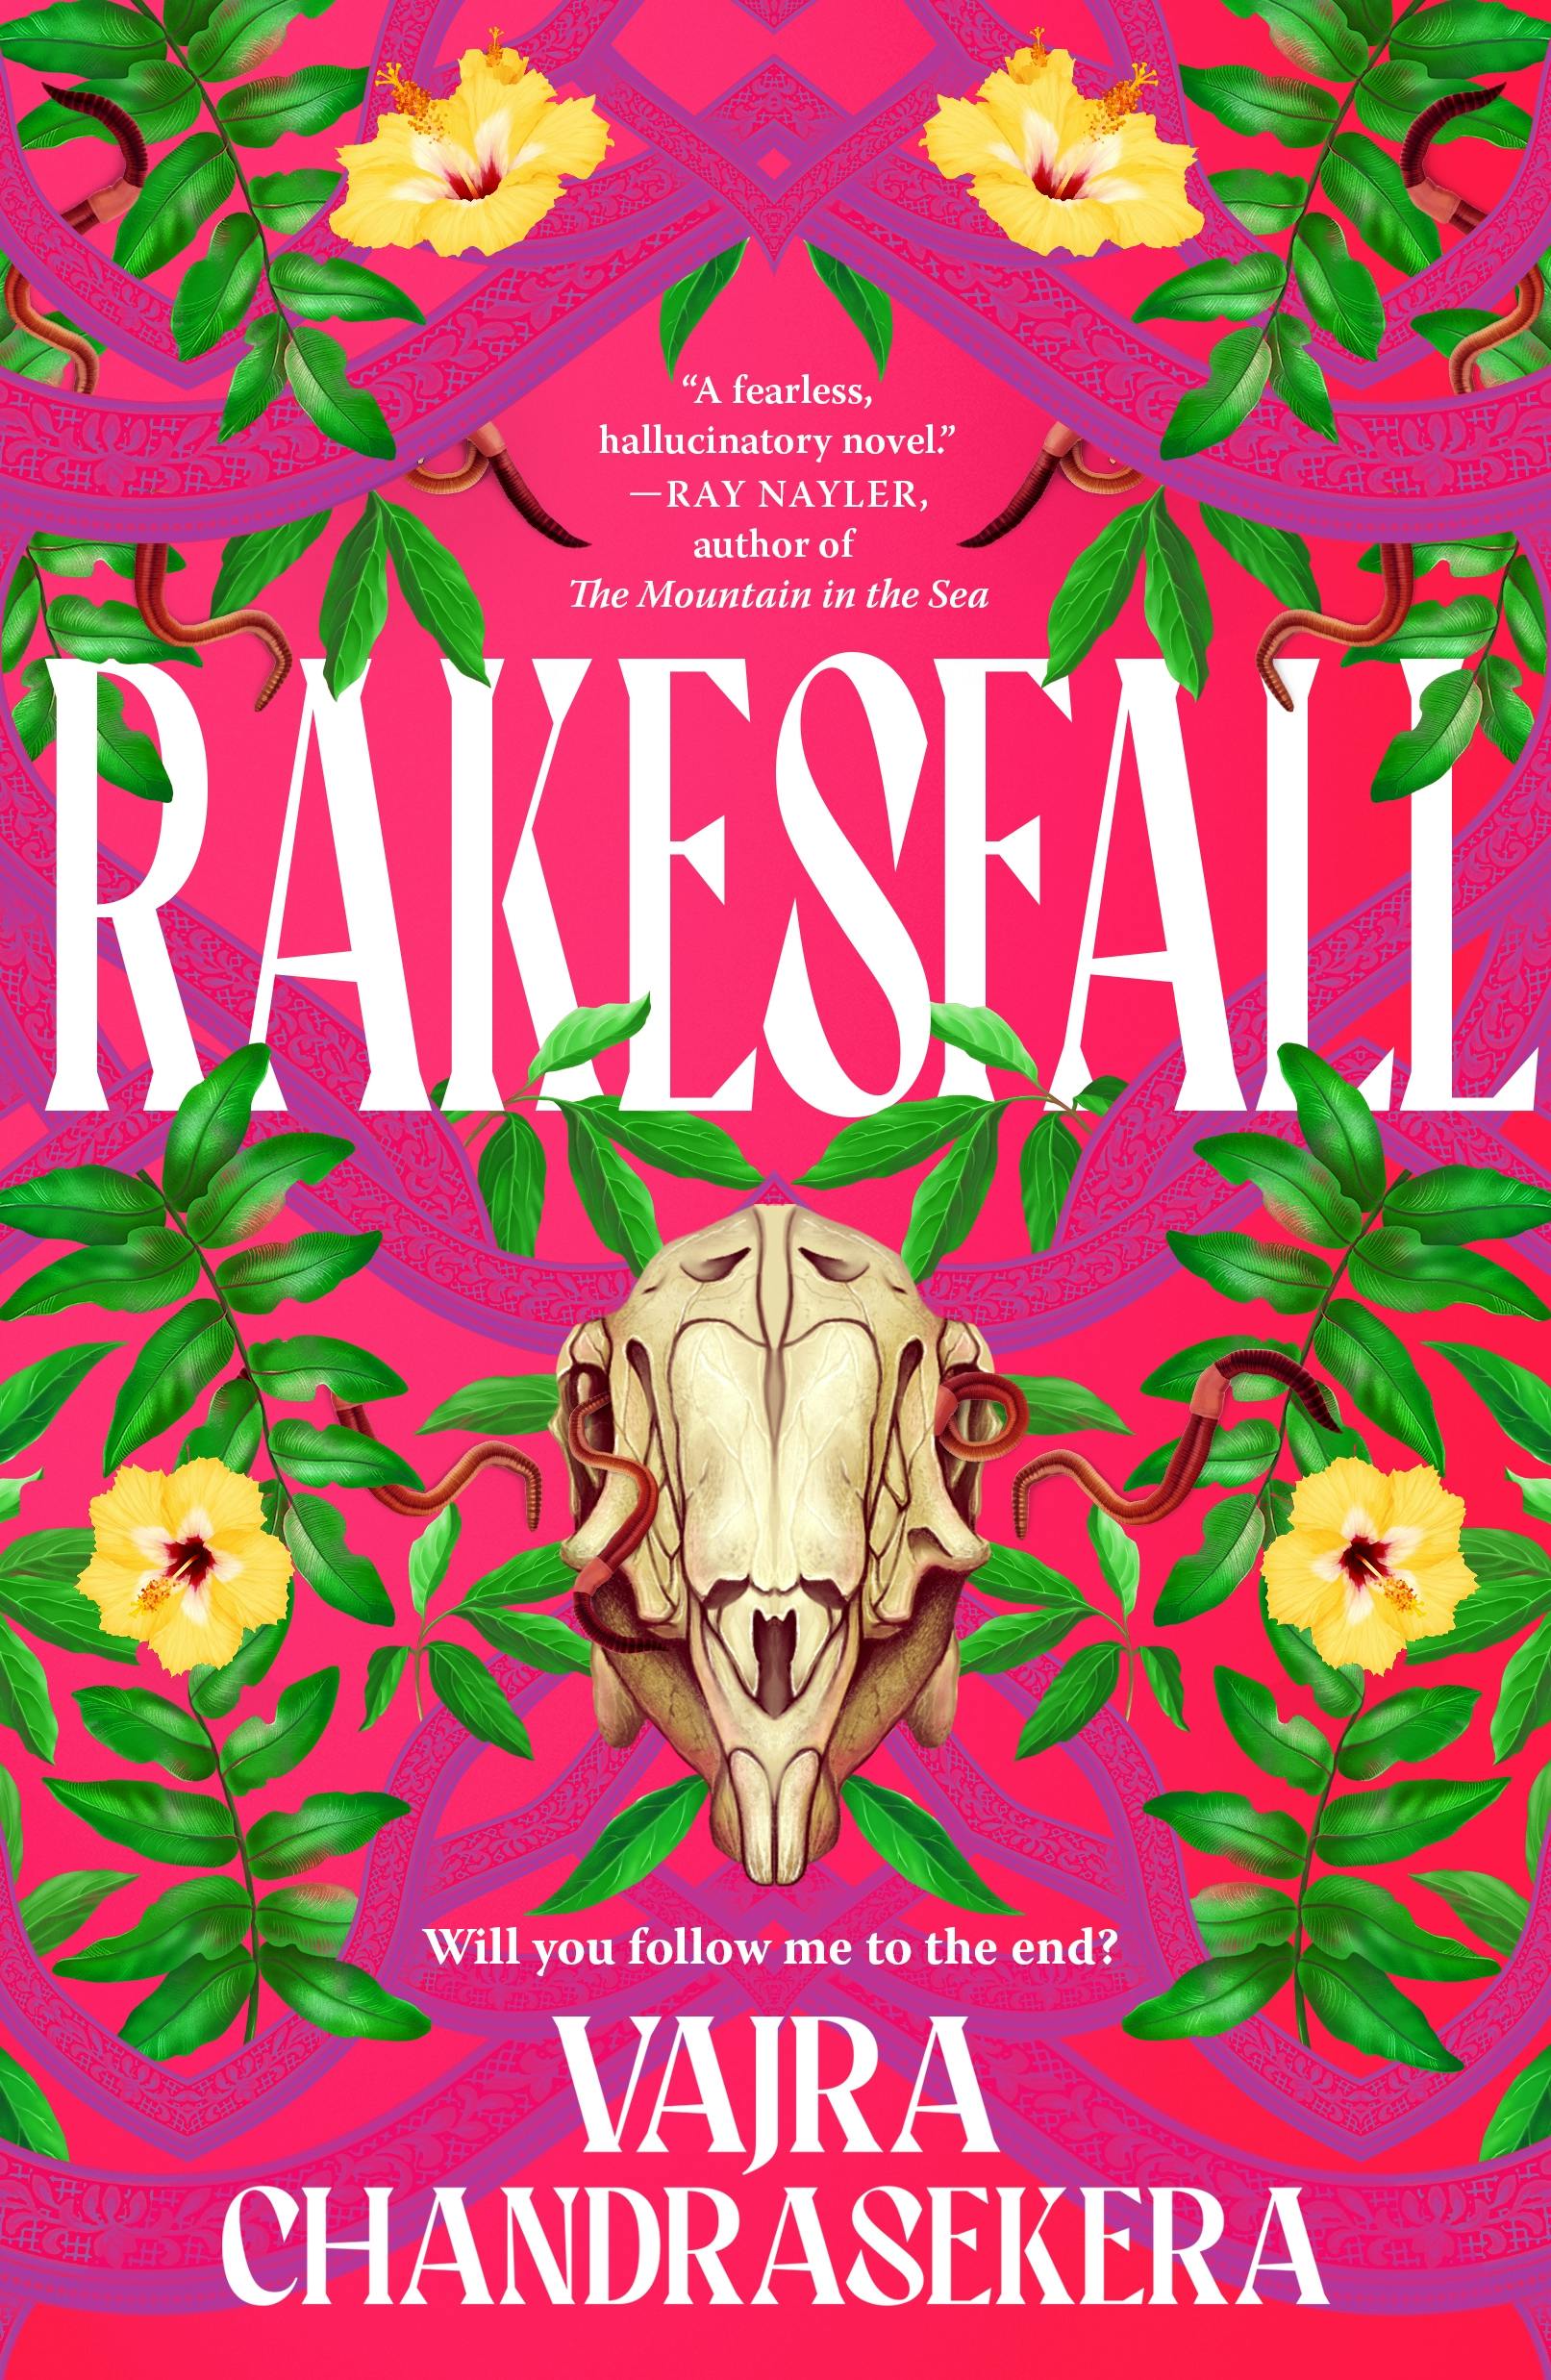 Cover for the book titled as: Rakesfall